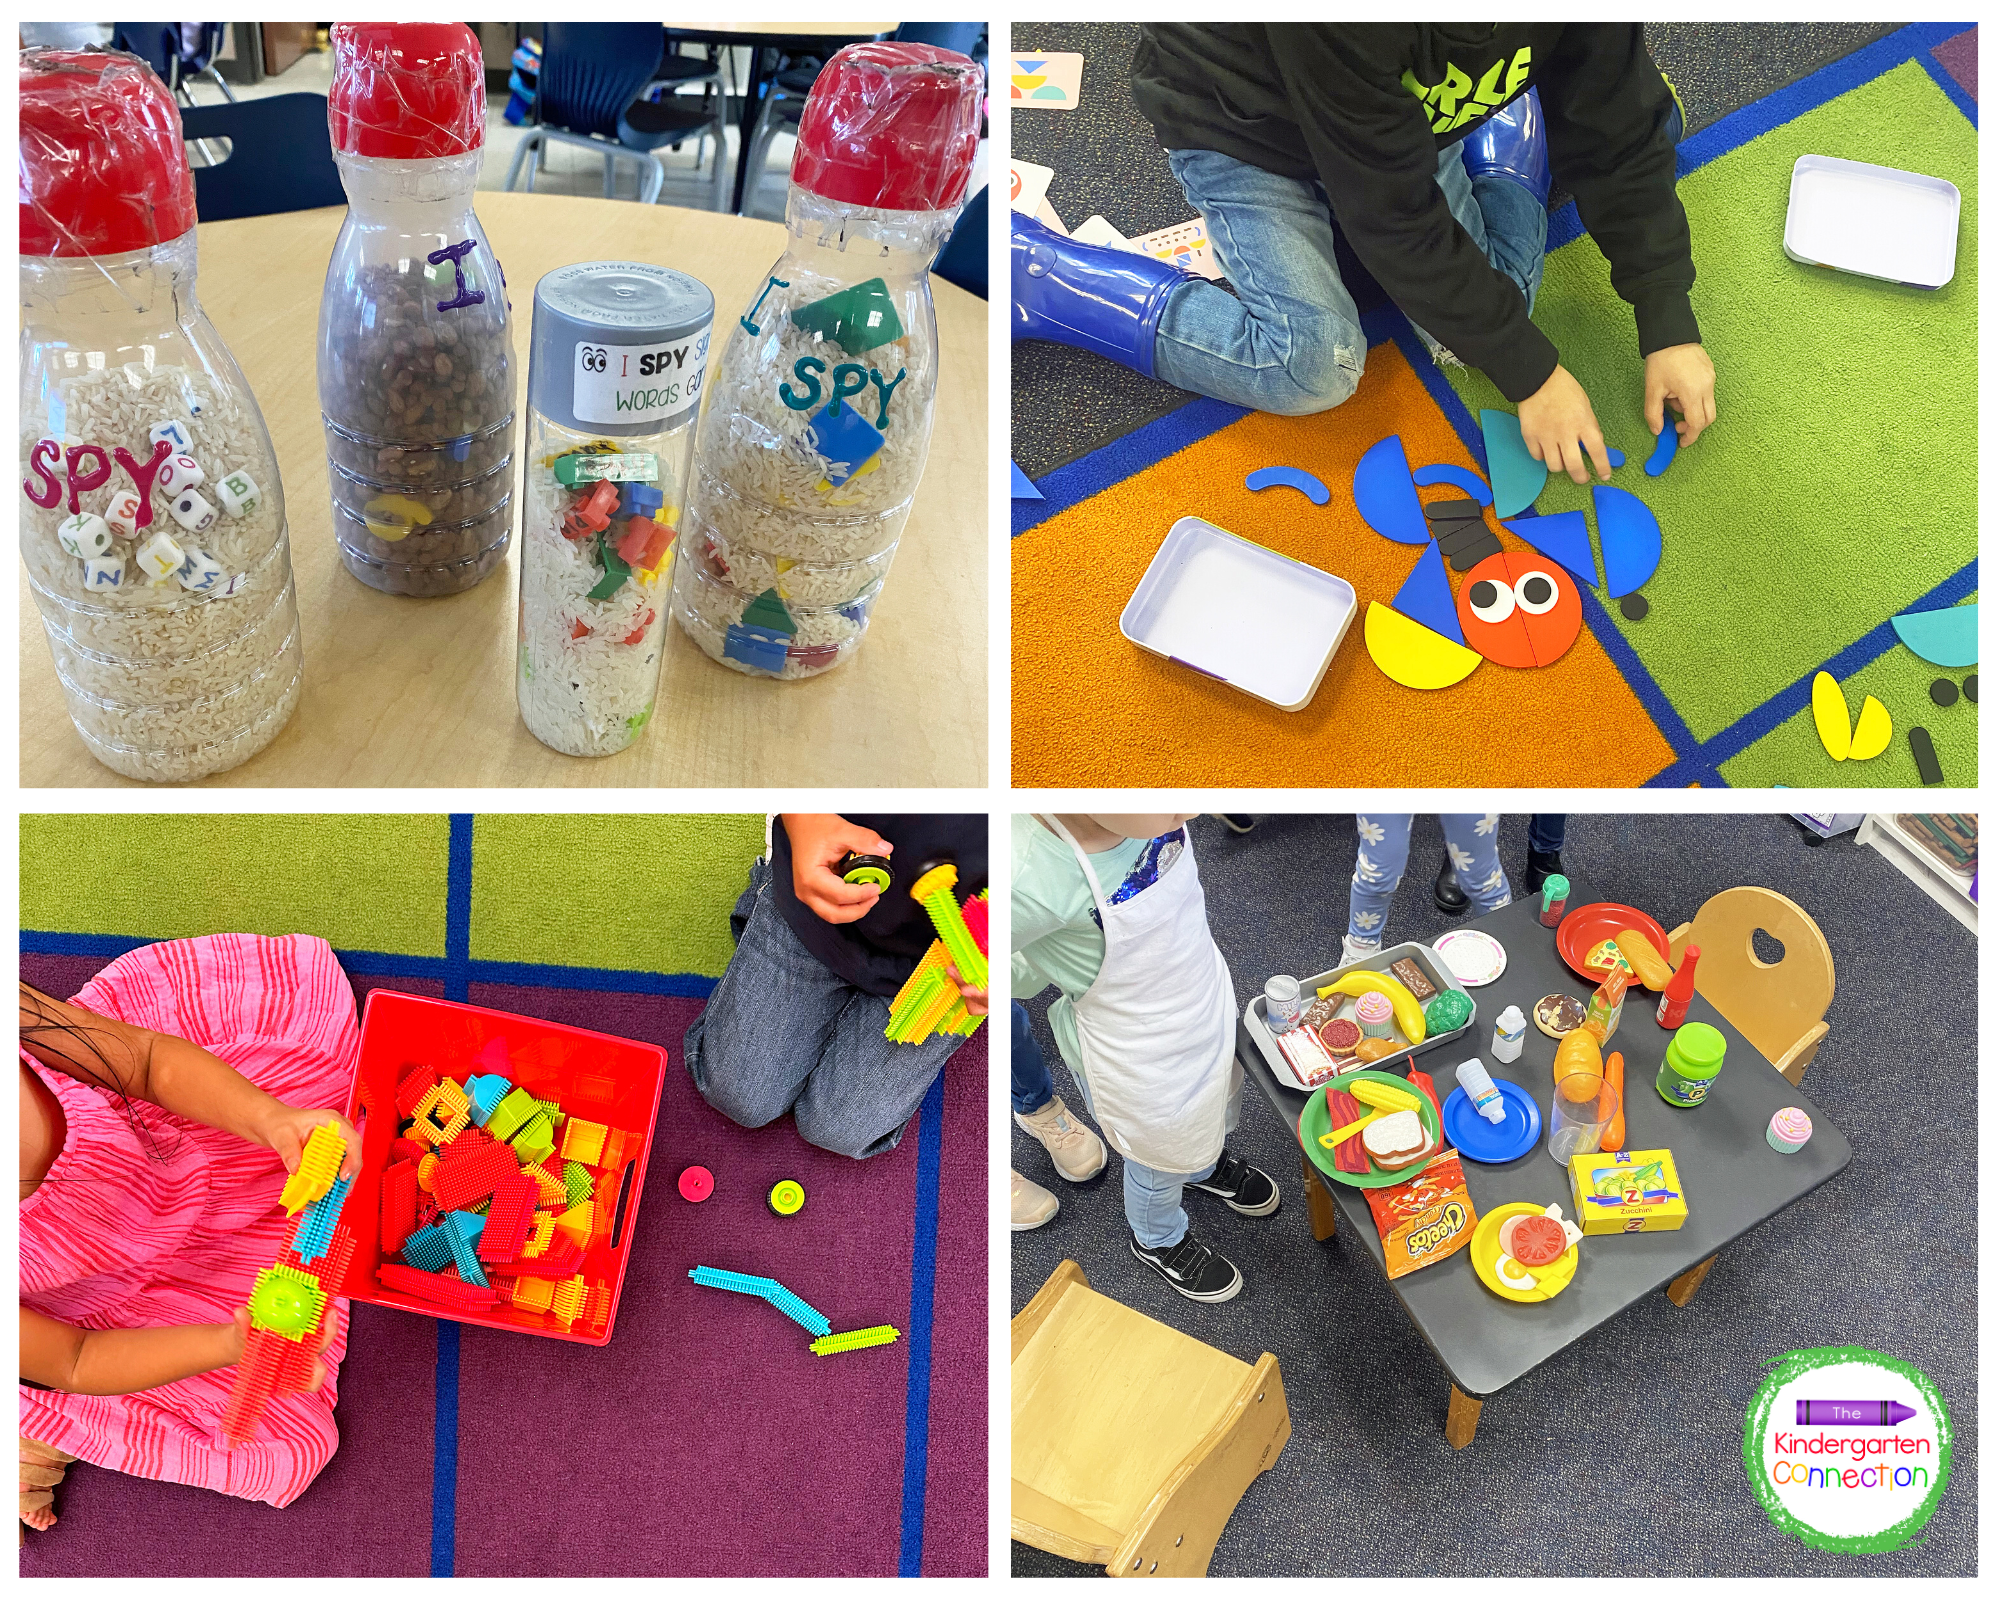 Dramatic play and sensory activities are a great way to incorporate more play in the classroom.